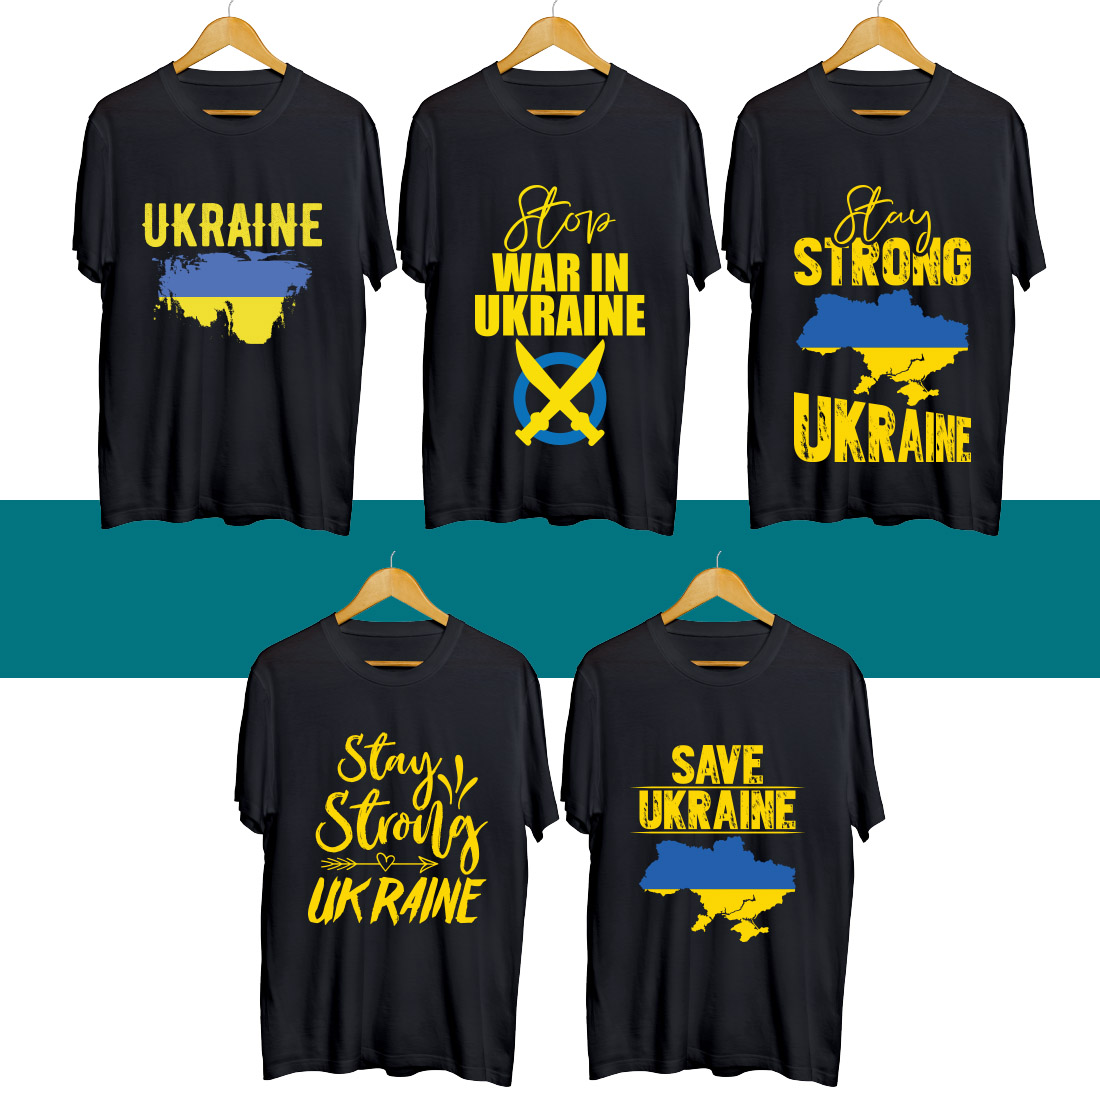 Four t - shirts that say war in ukraine and save ukraine.